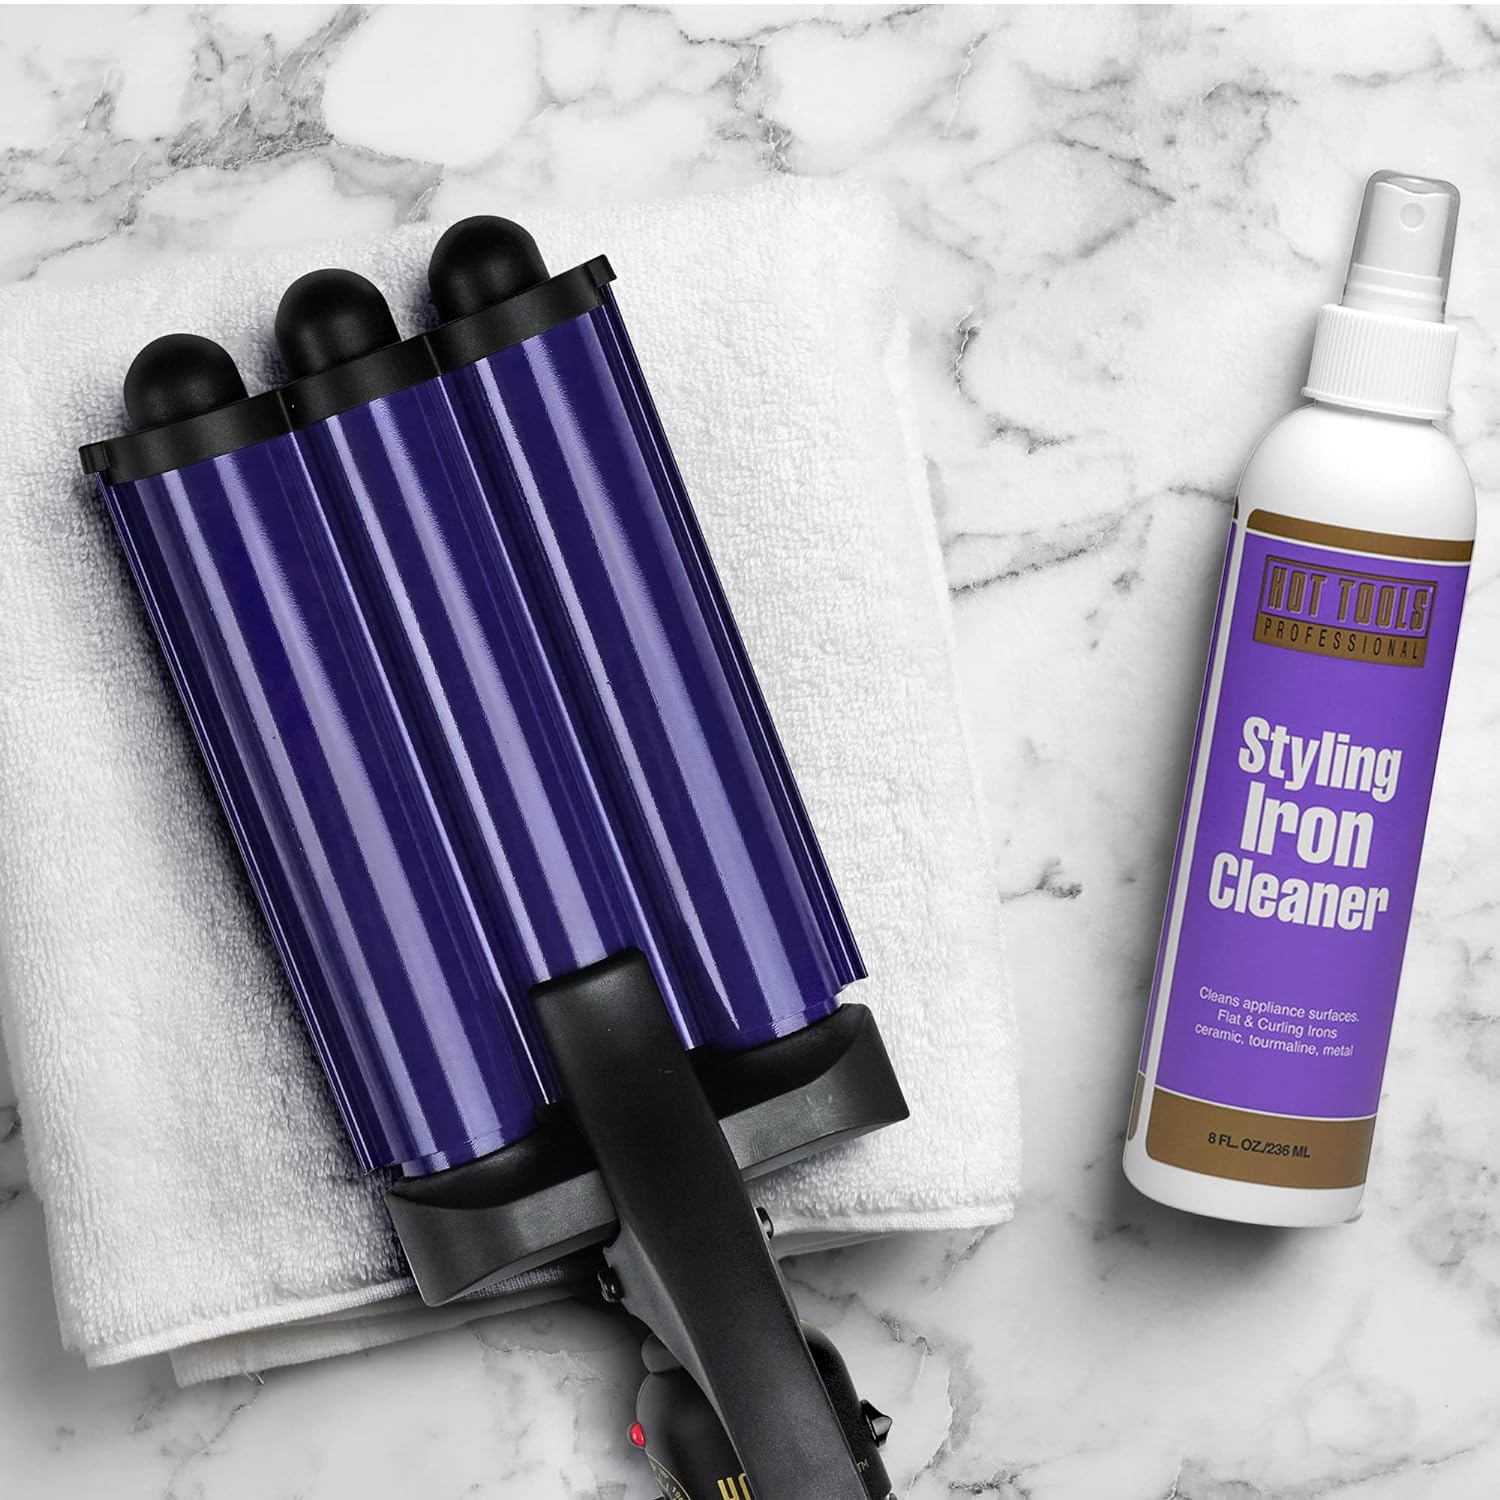 Hot Tools Curling Iron Cleaner